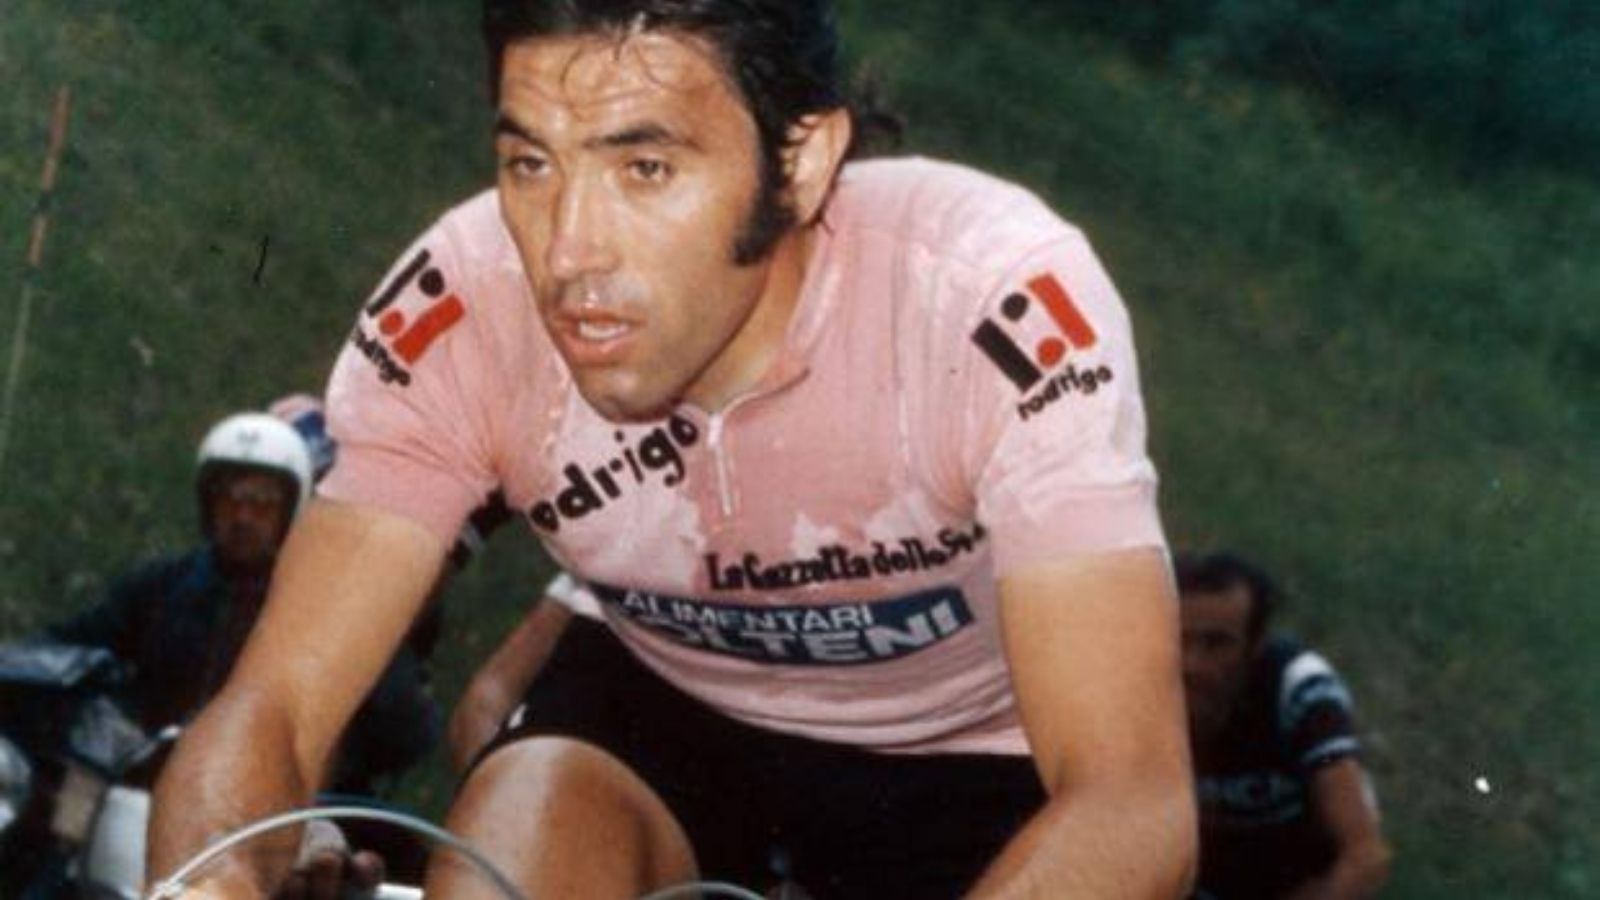 Legendary Belgian Cyclist Eddy Merckx spent the most day in pink jersey (maglia rosa)